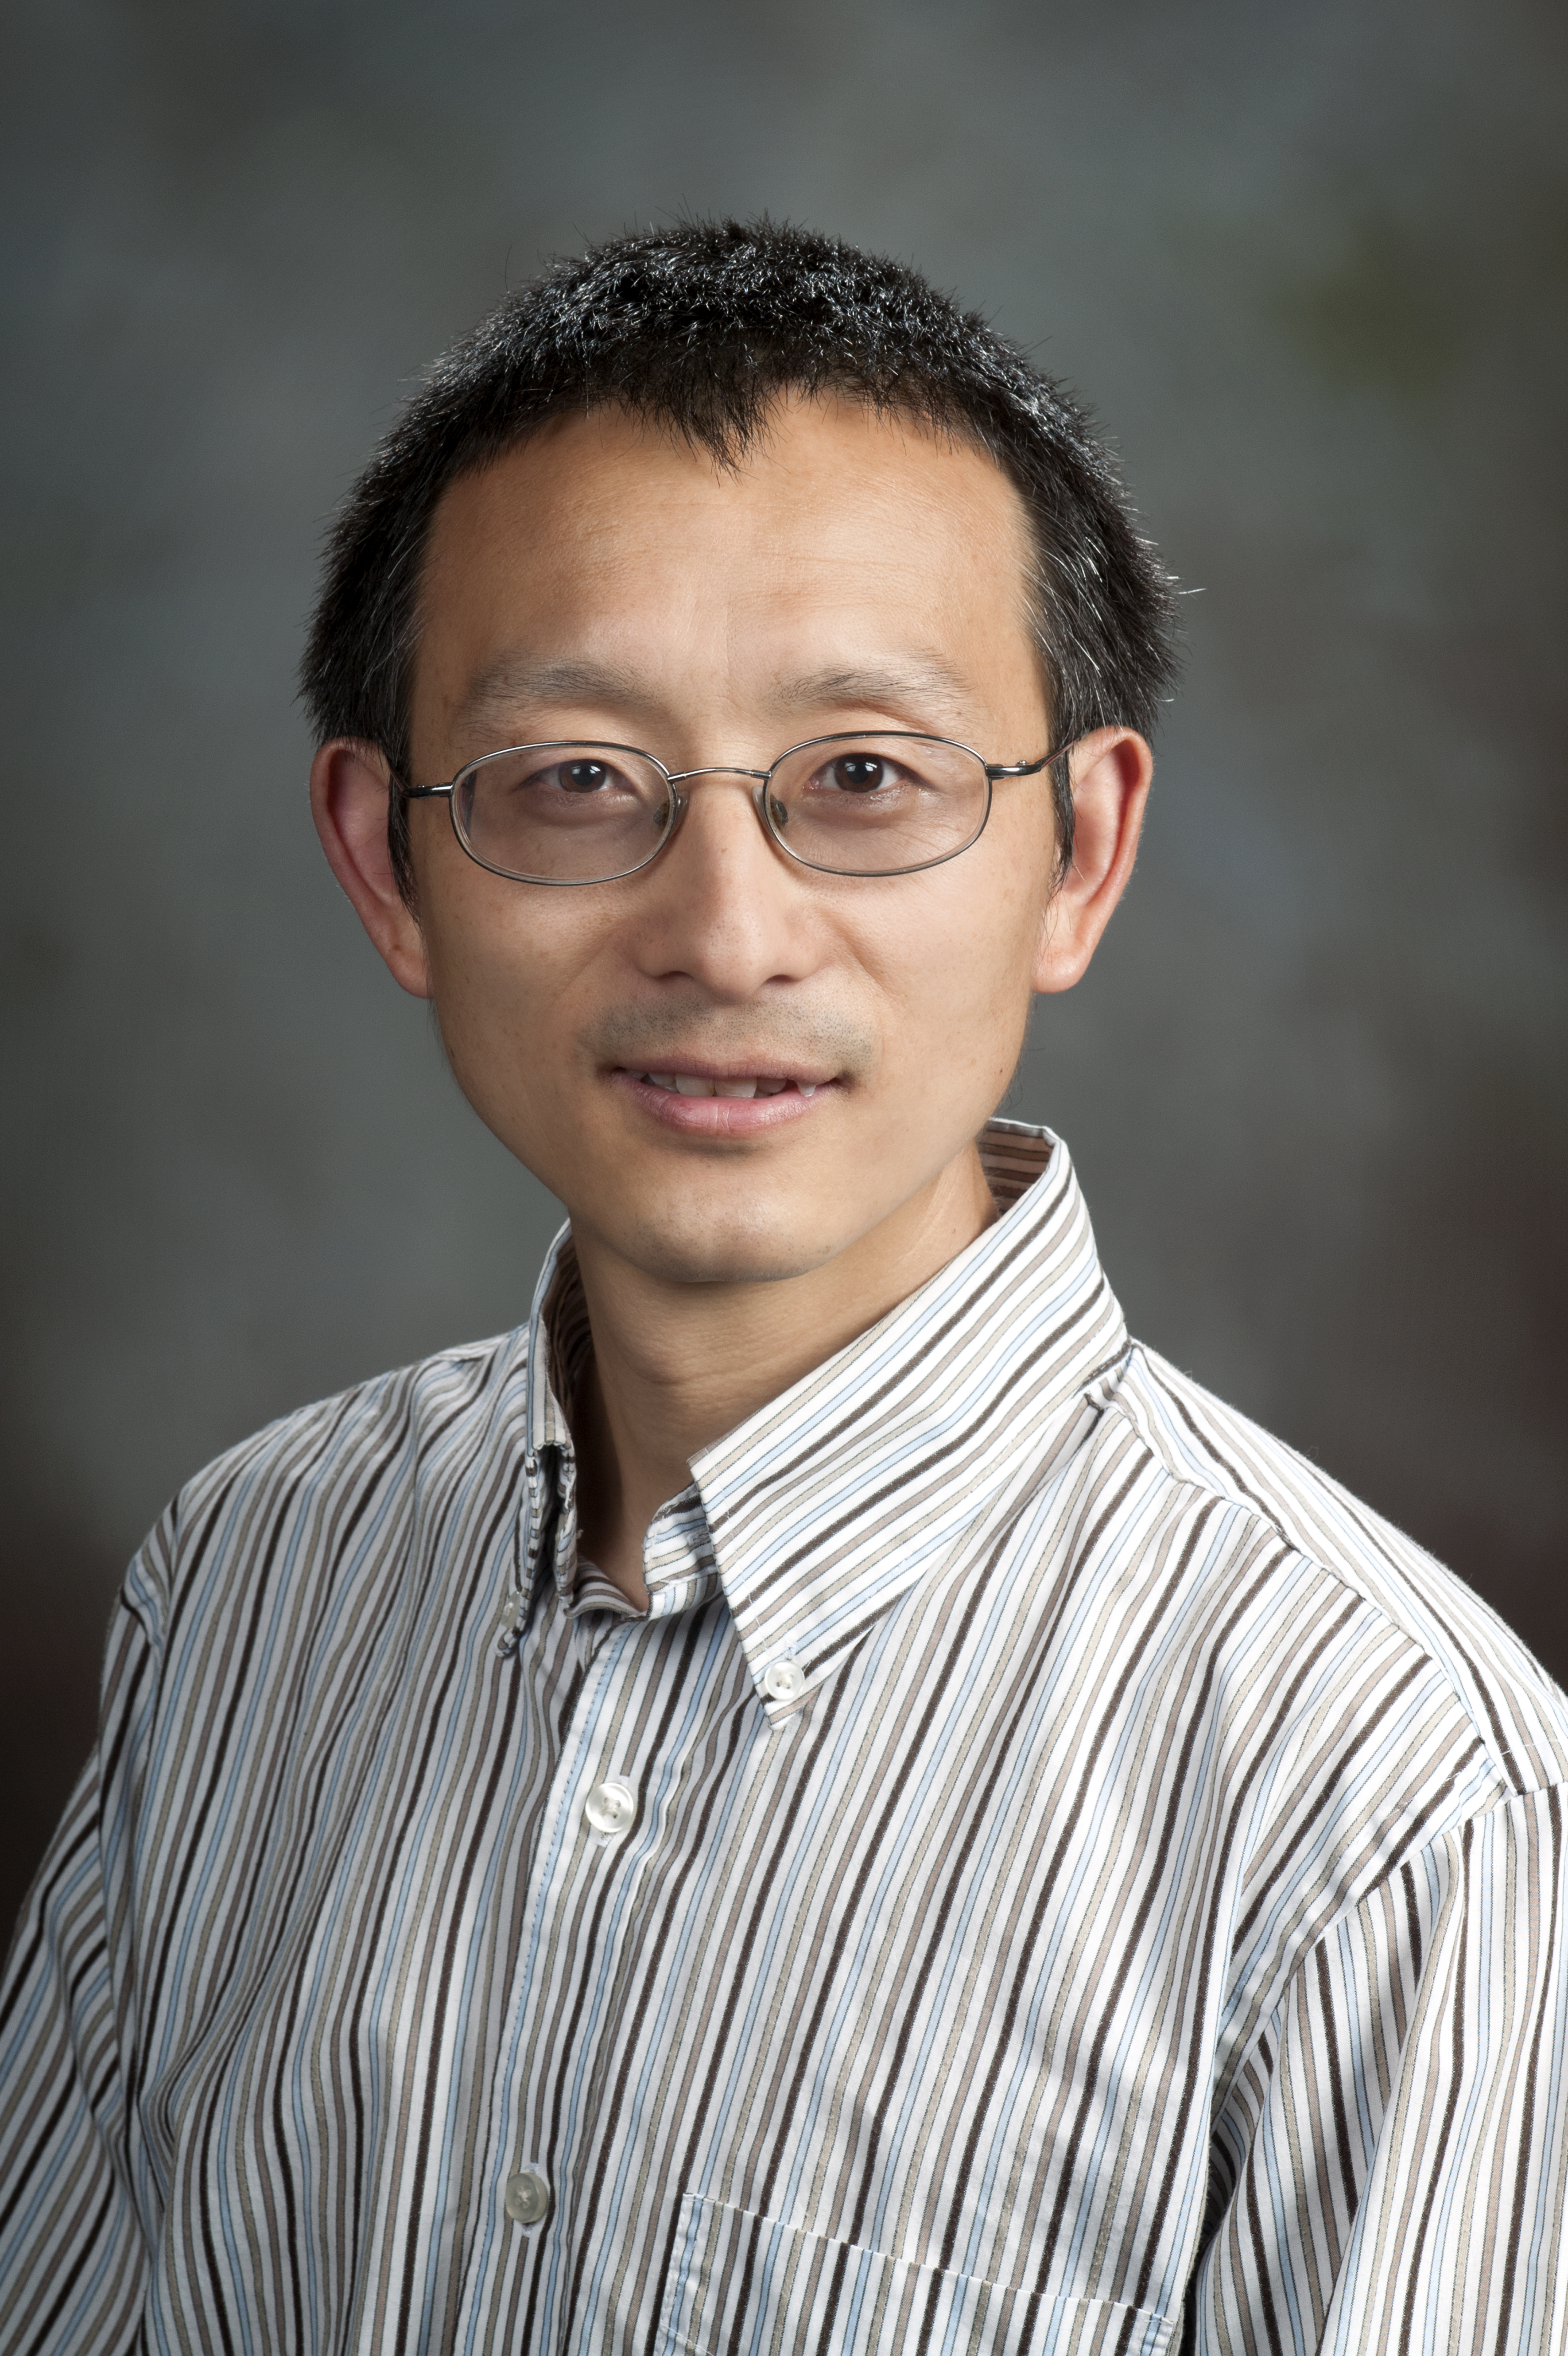 Jianhua Xing studies cell cytoskeleton structure